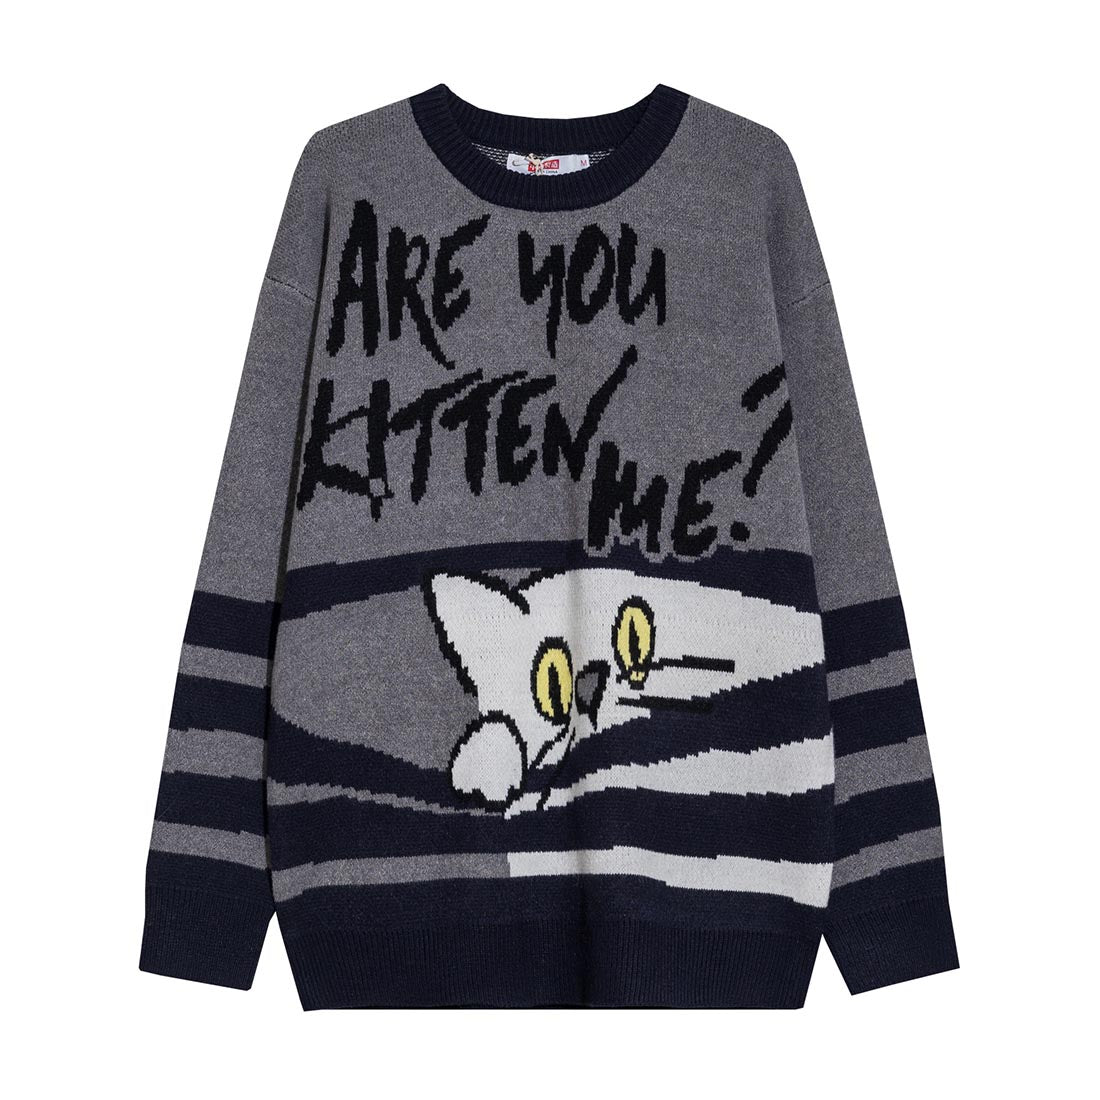 "KITTEN" PRINTED KNITTED SWEATER